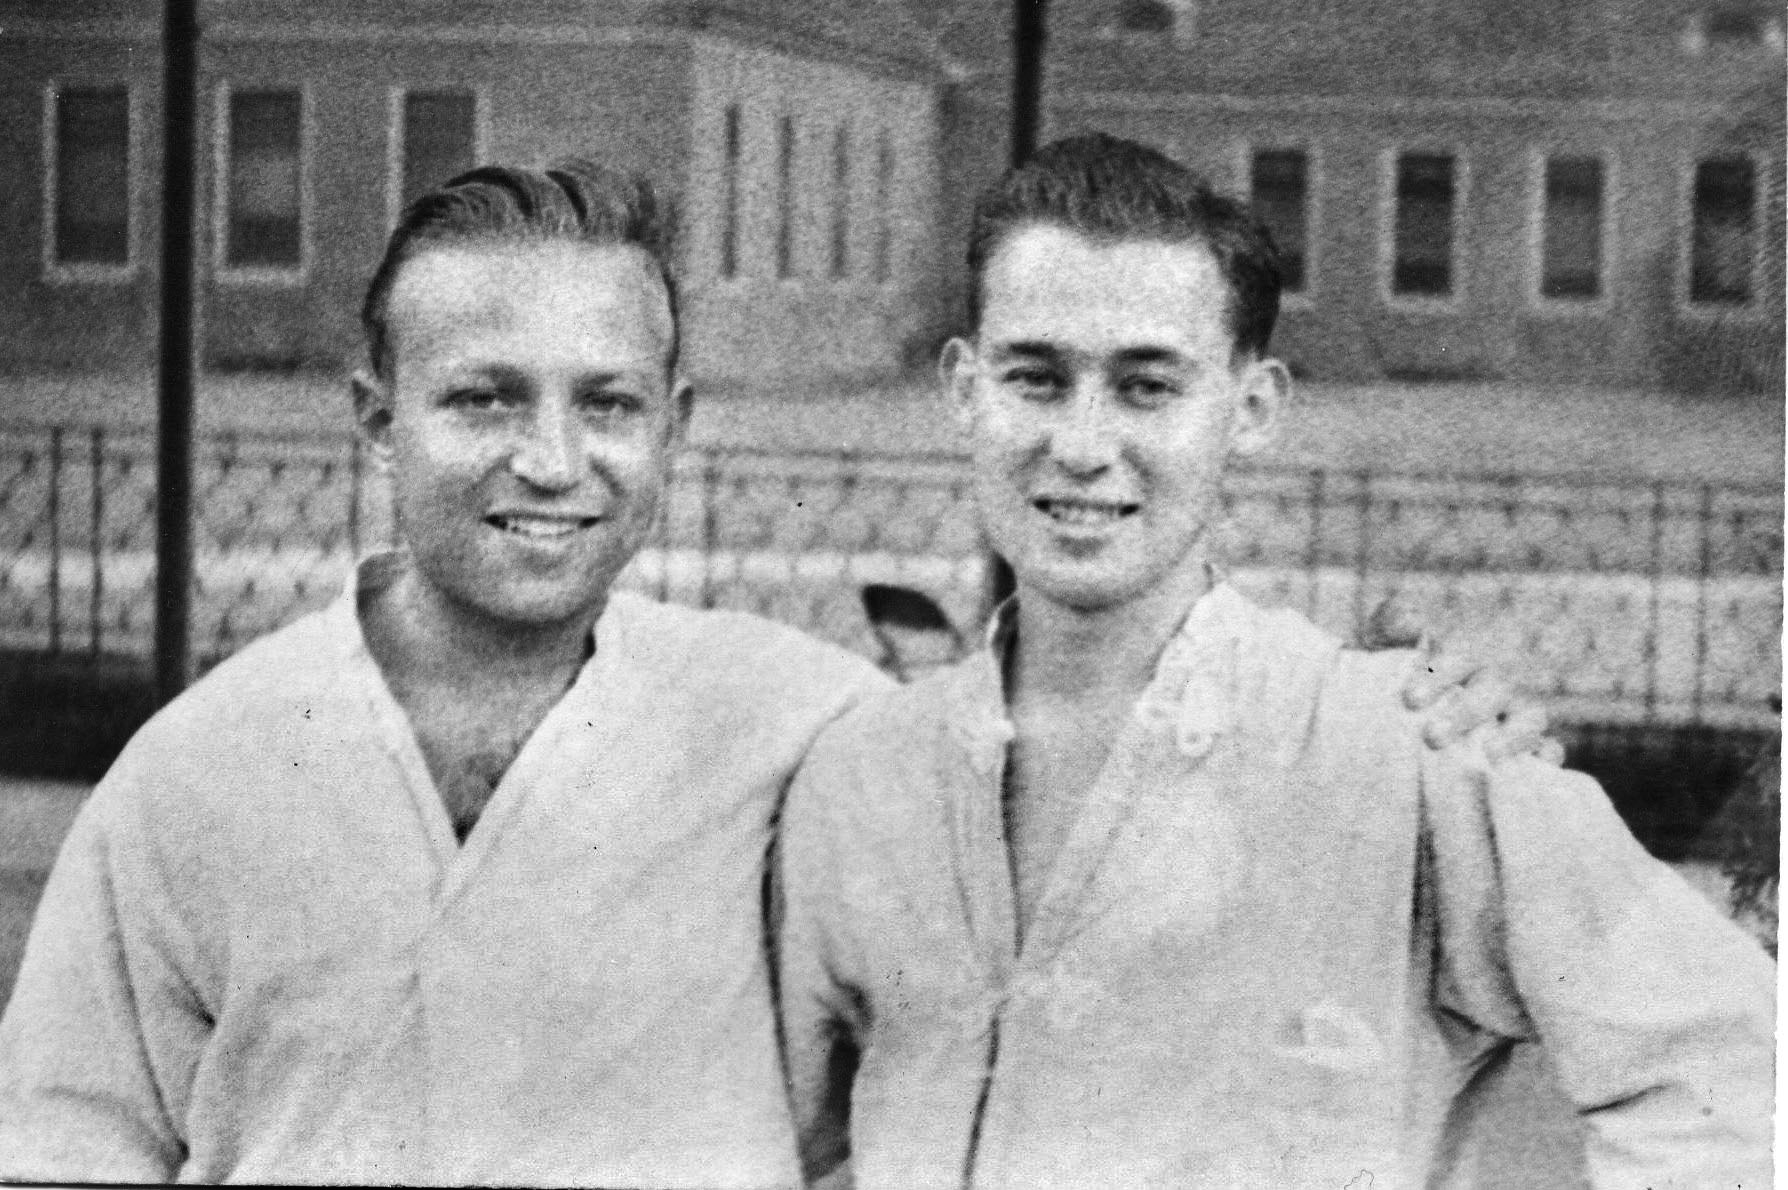 Bob Max, right, photographed with a fellow patient in a hospital in the United States while he recovered from wounds and the privations as a German POW. His recovery required more than a year of treatment.